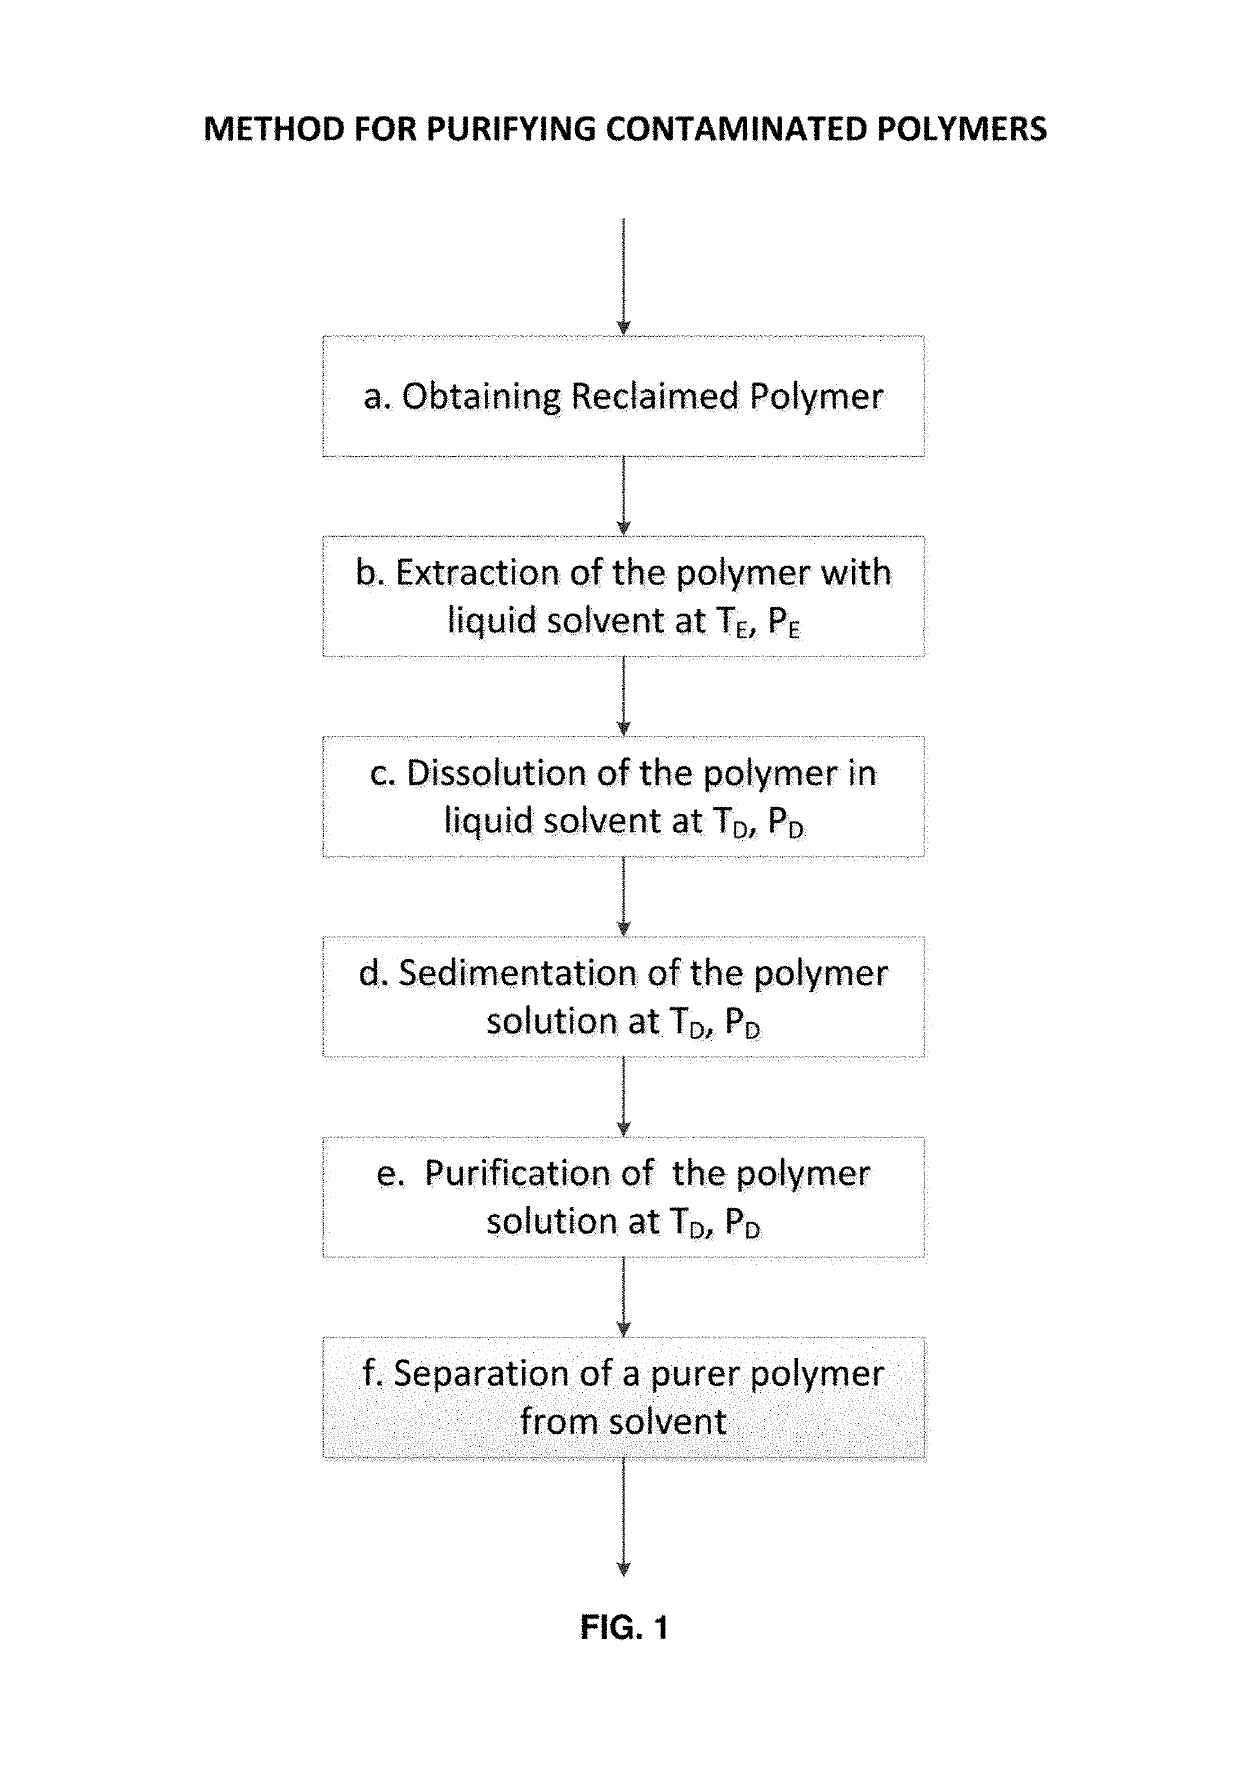 Method for purifying reclaimed polymers